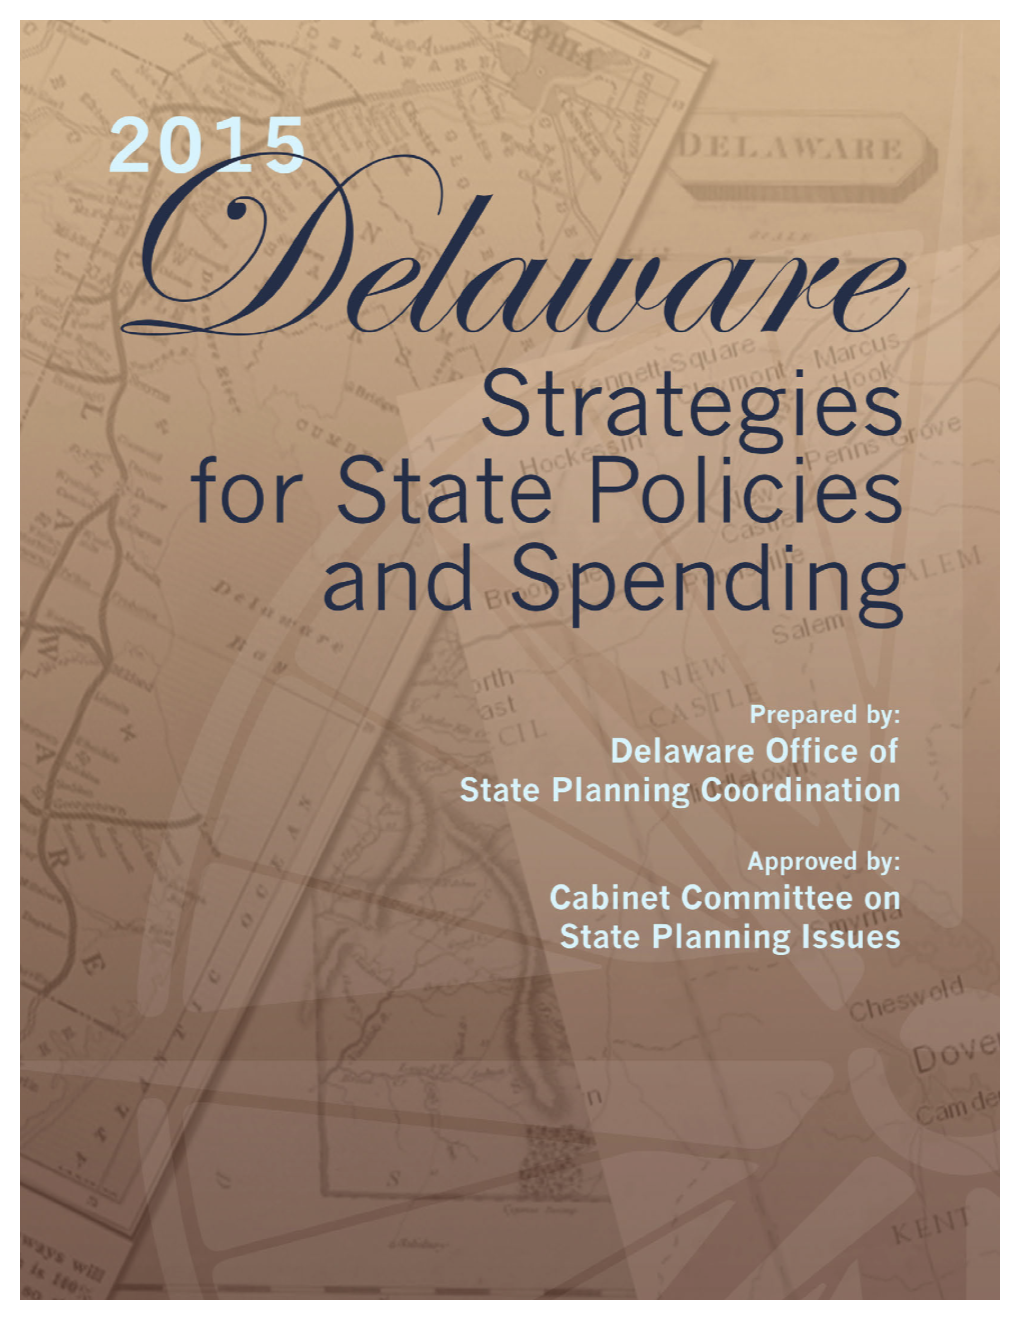 2015 Delaware Strategies for State Policies and Spending